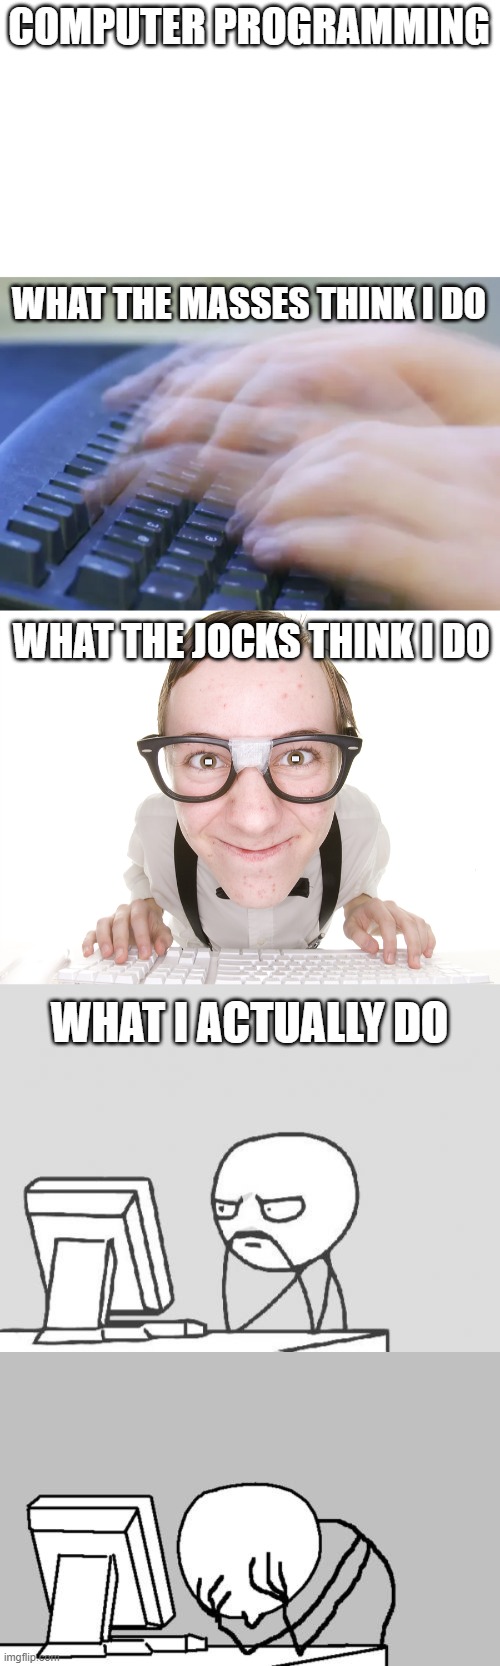 COMPUTER PROGRAMMING; WHAT THE MASSES THINK I DO; WHAT THE JOCKS THINK I DO; WHAT I ACTUALLY DO | image tagged in computer nerd | made w/ Imgflip meme maker